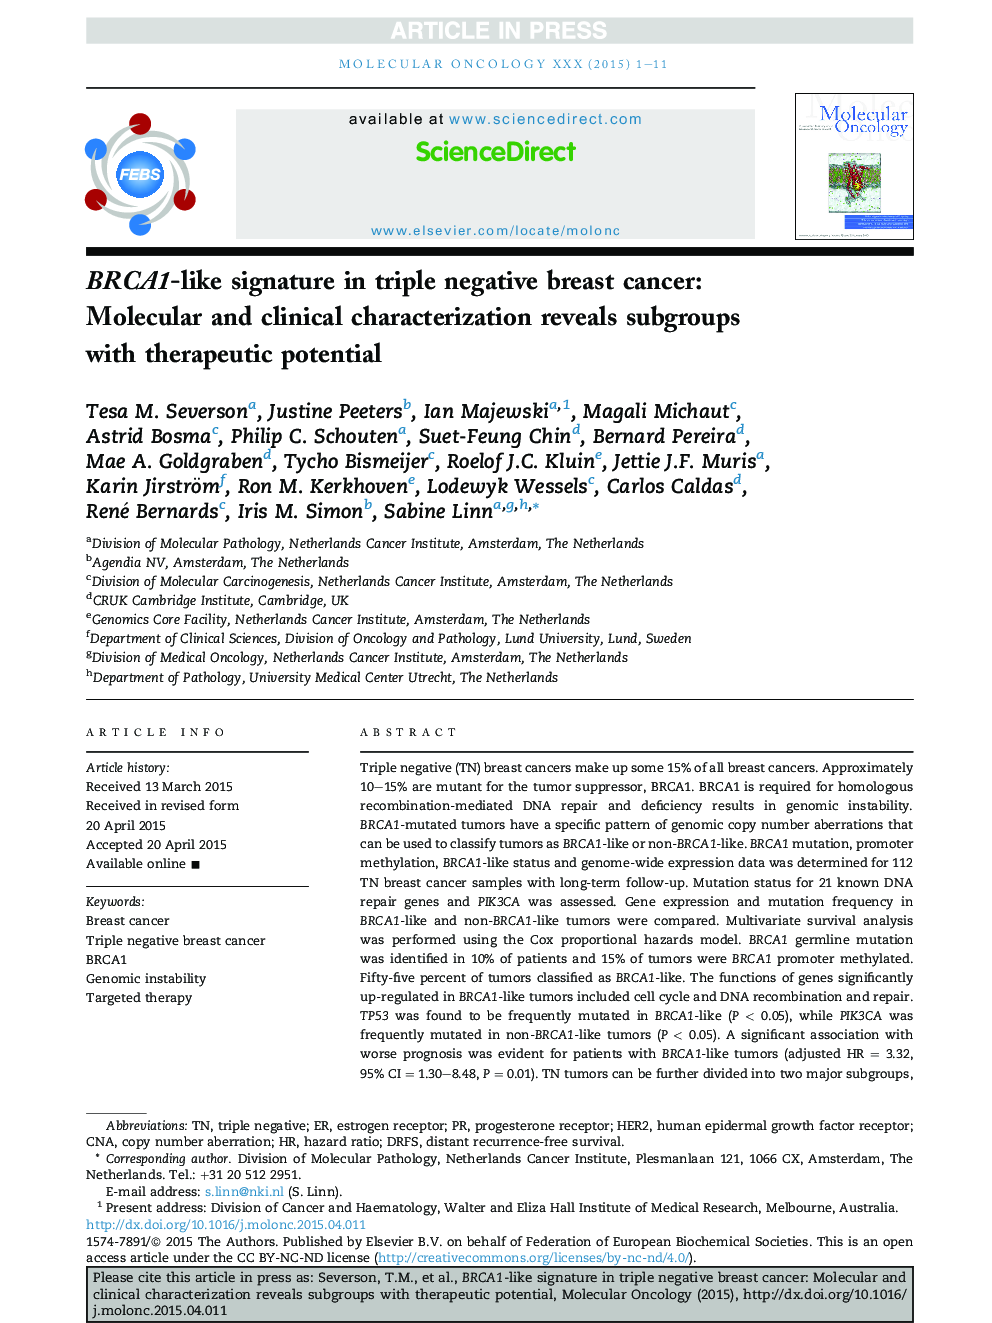 BRCA1-like signature in triple negative breast cancer: Molecular and clinical characterization reveals subgroups with therapeutic potential